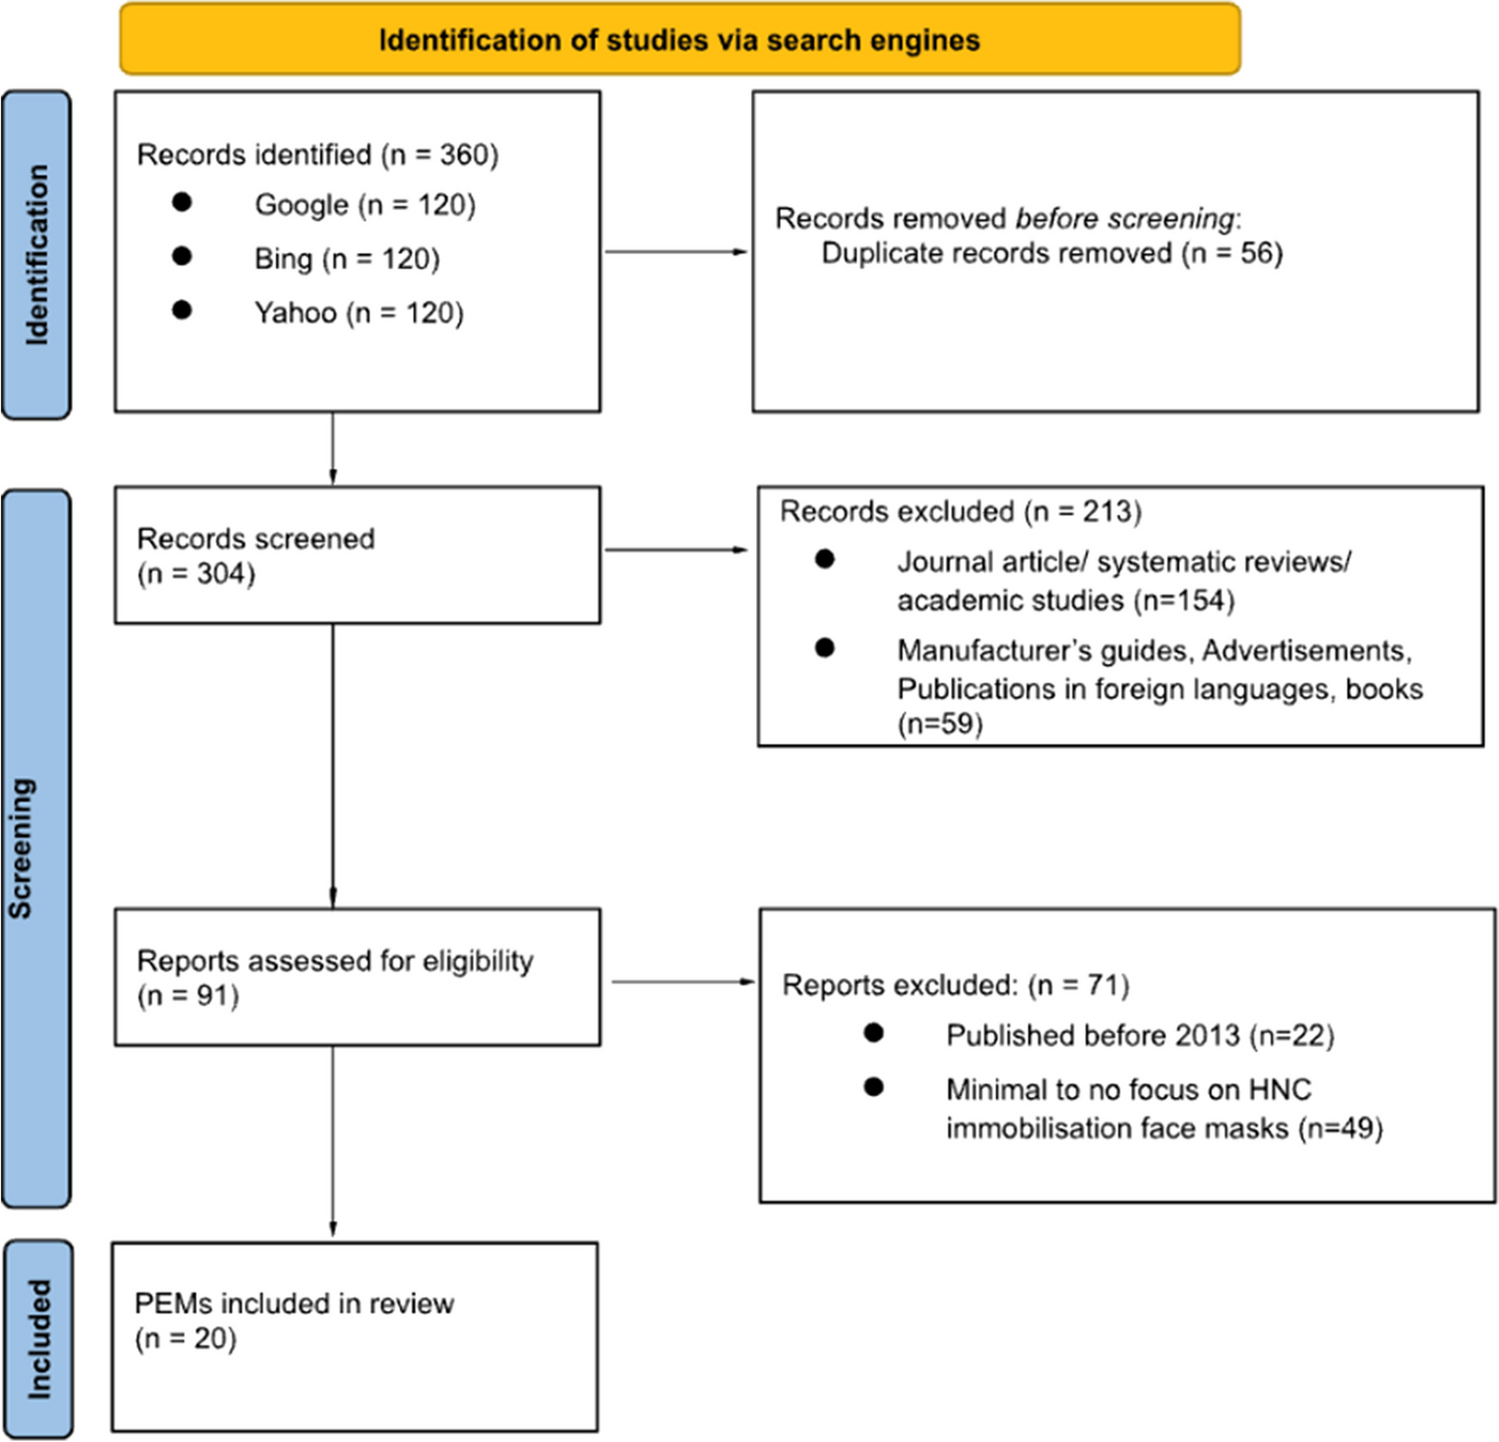 Patient Education Materials for Immobilisation Masks in Radiation Therapy for Adult Head and Neck Cancer Patients: A Scoping Review